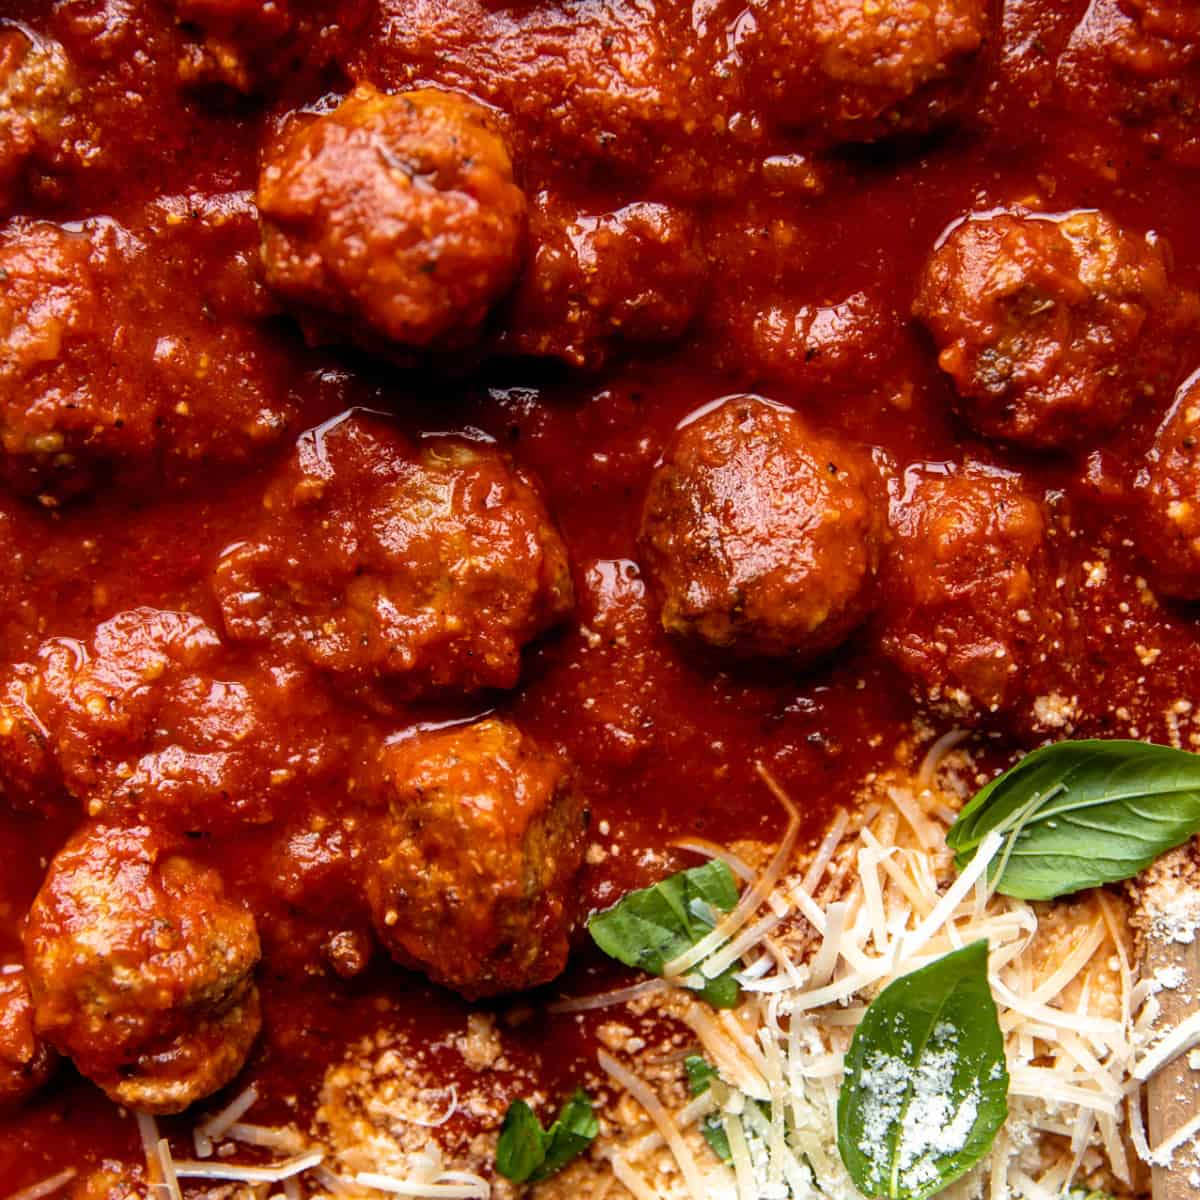 Meatballs in marinara sauce with parmesan on top.